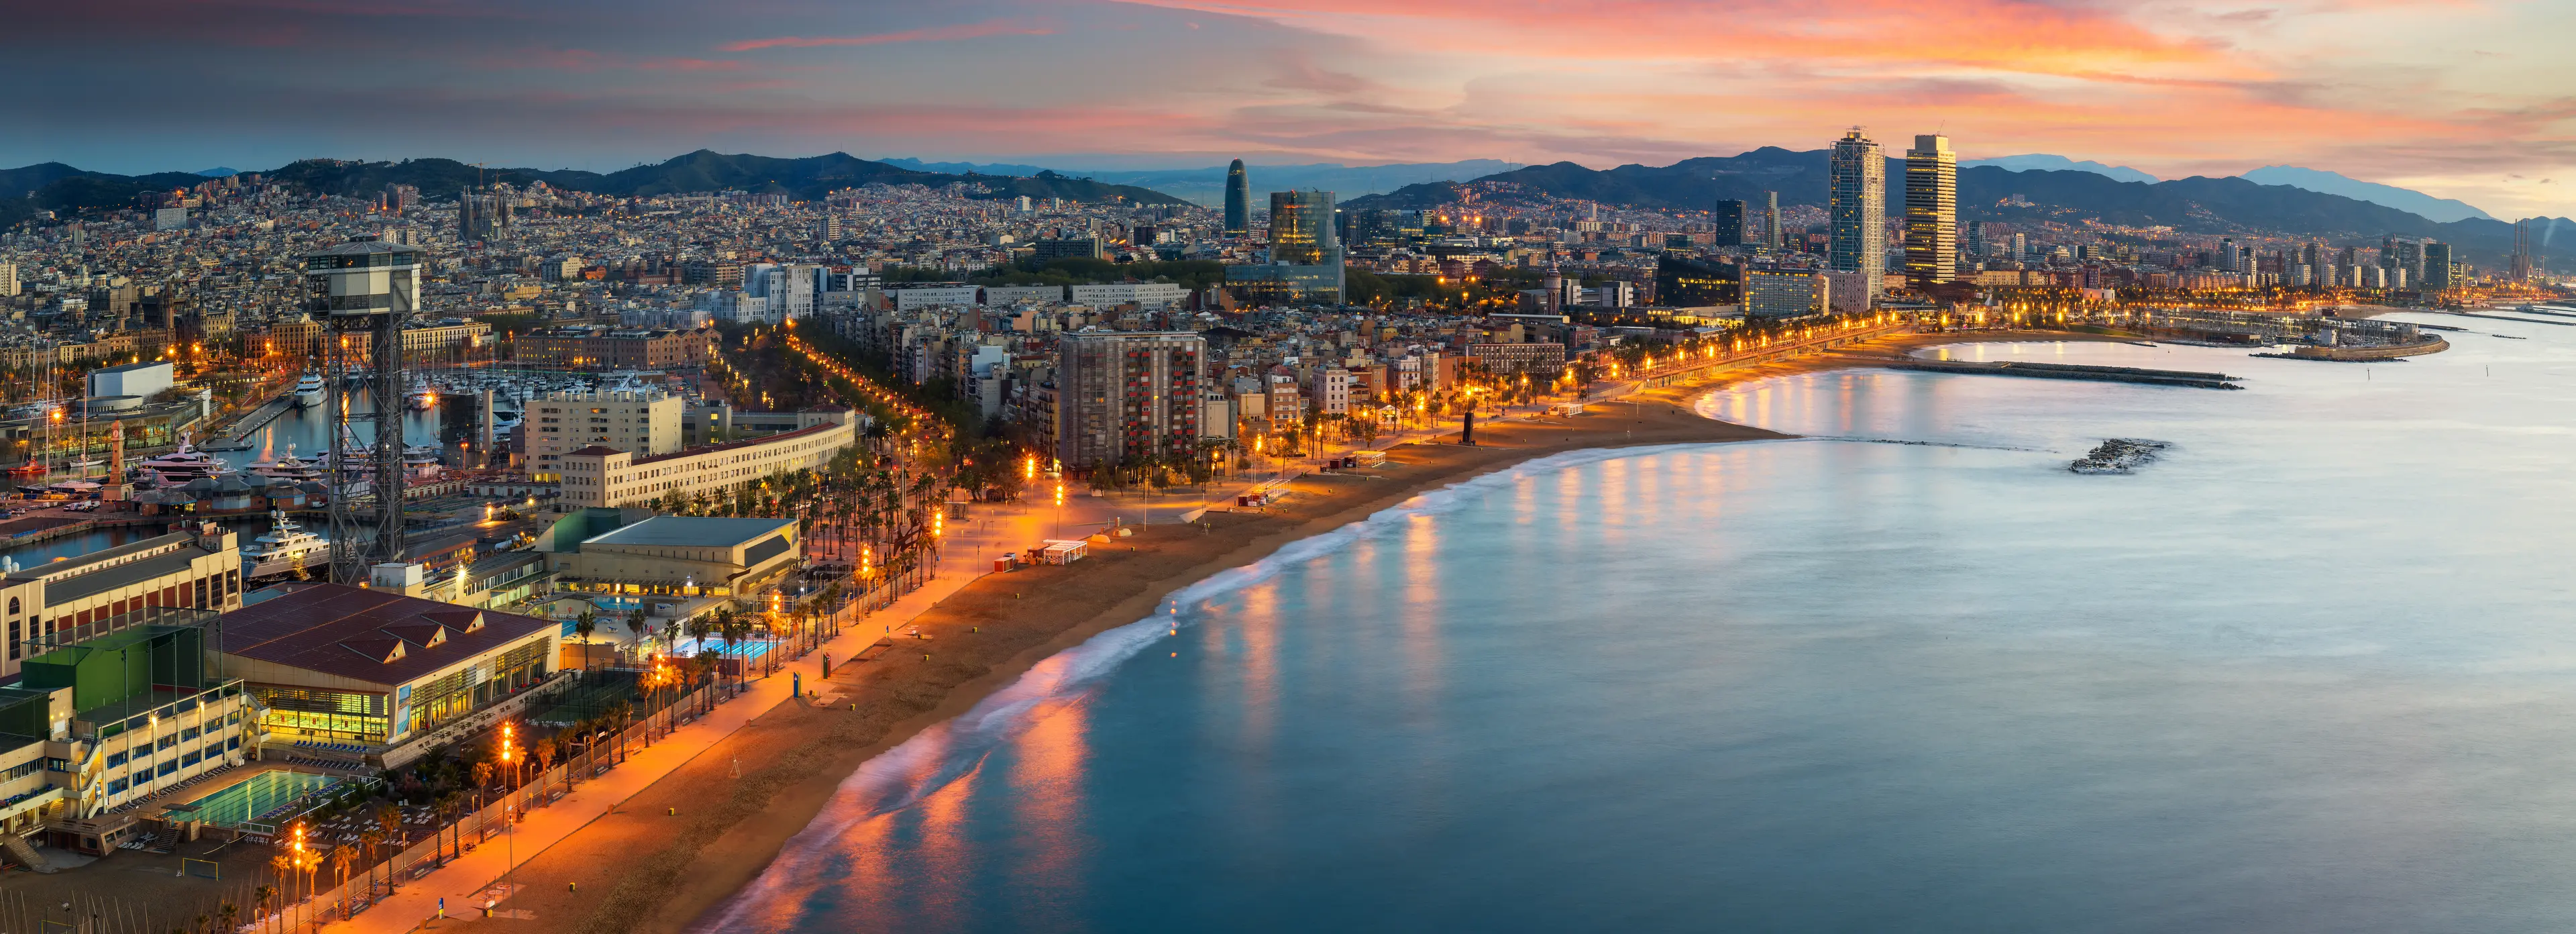 2-Day Barcelona, Spain Adventure: A Compact Itinerary